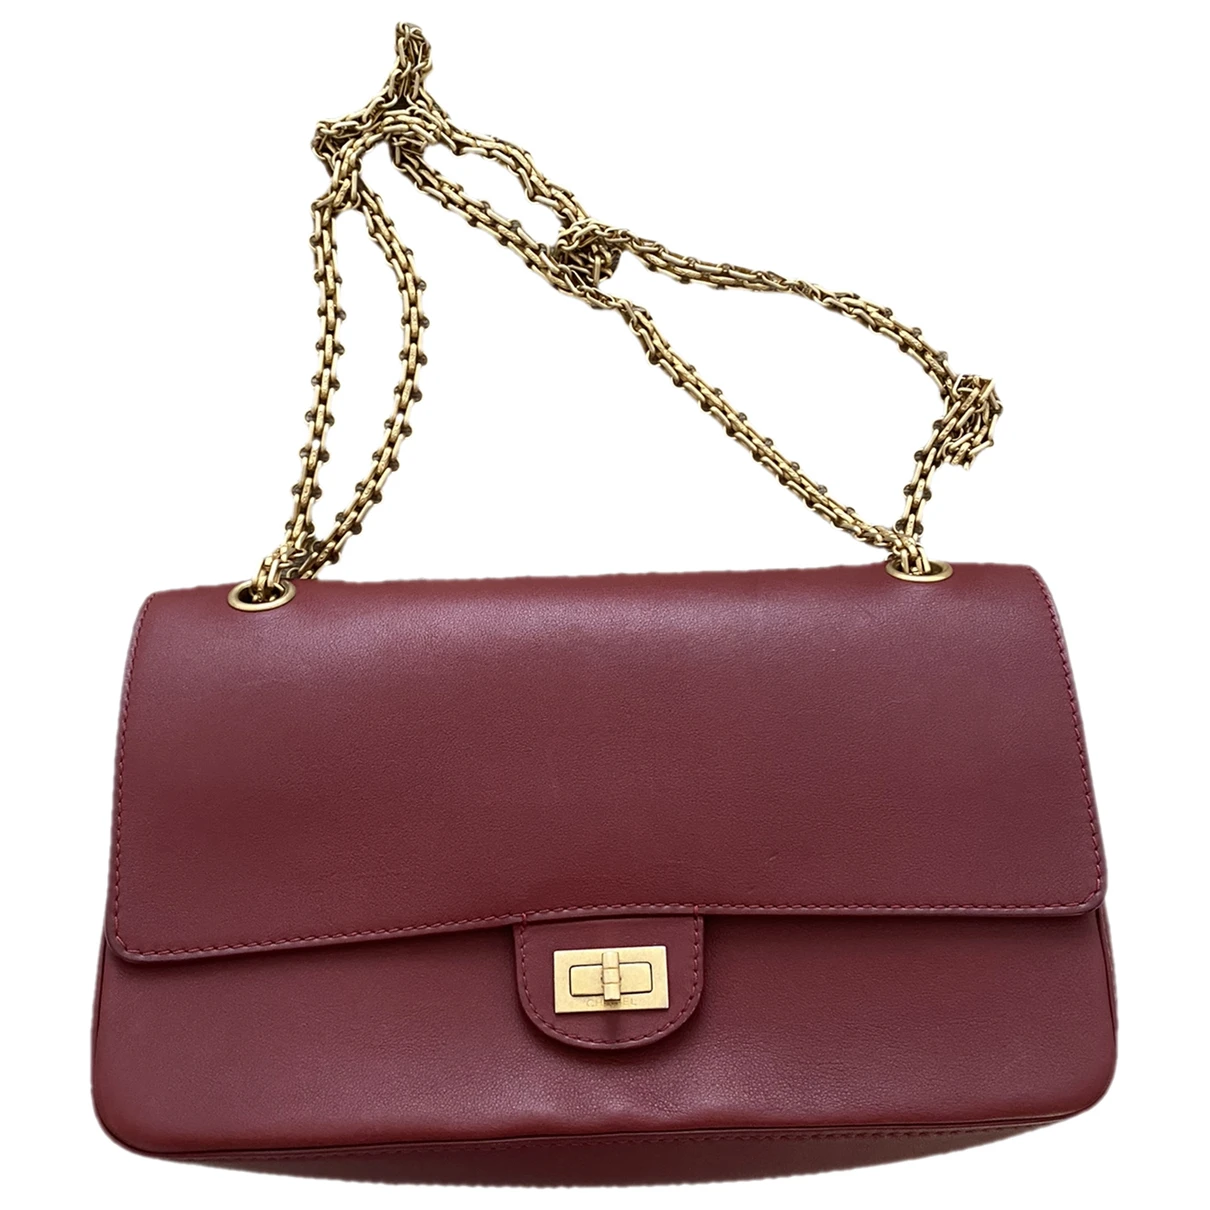 Pre-owned Chanel 2.55 Leather Crossbody Bag In Burgundy